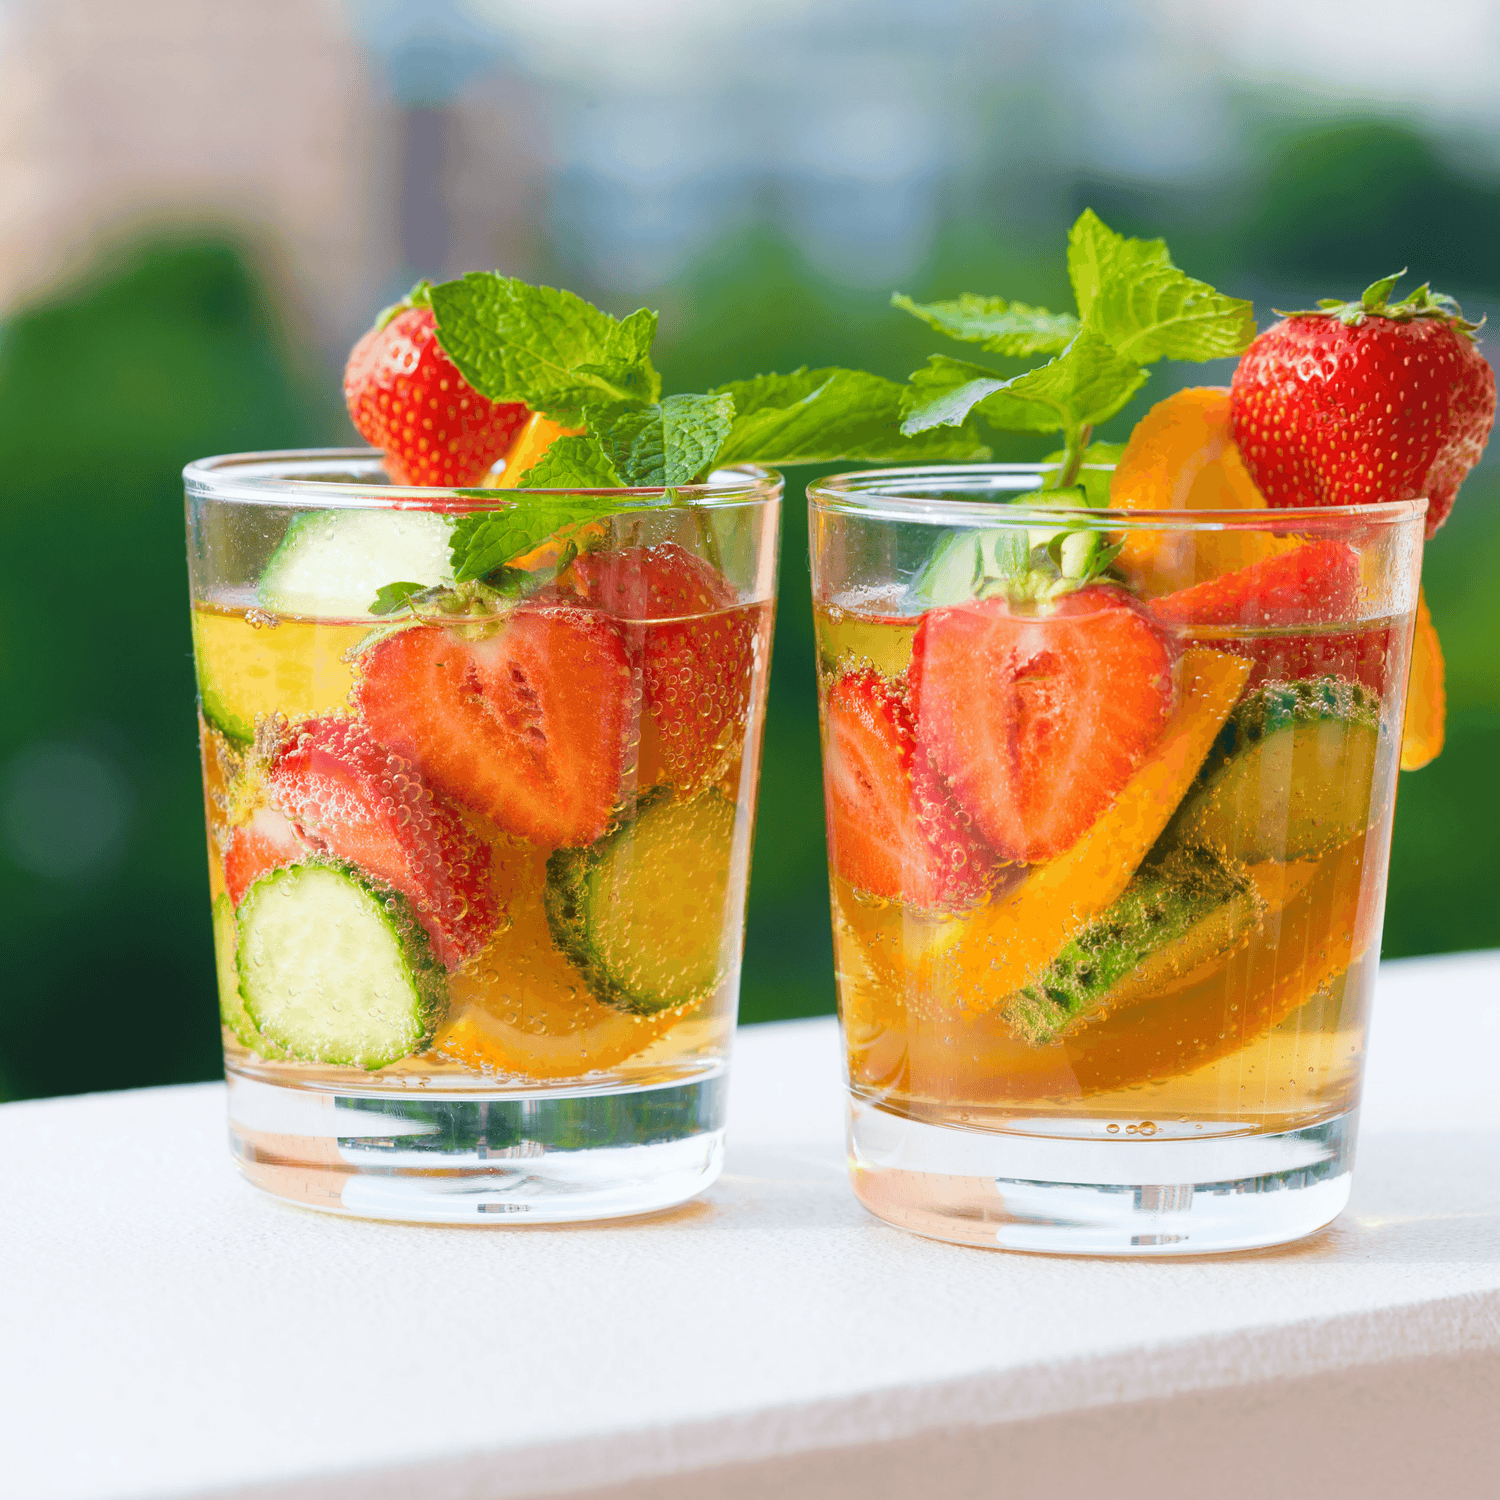 Must have refreshing Mocktails to cool you down on a hot day